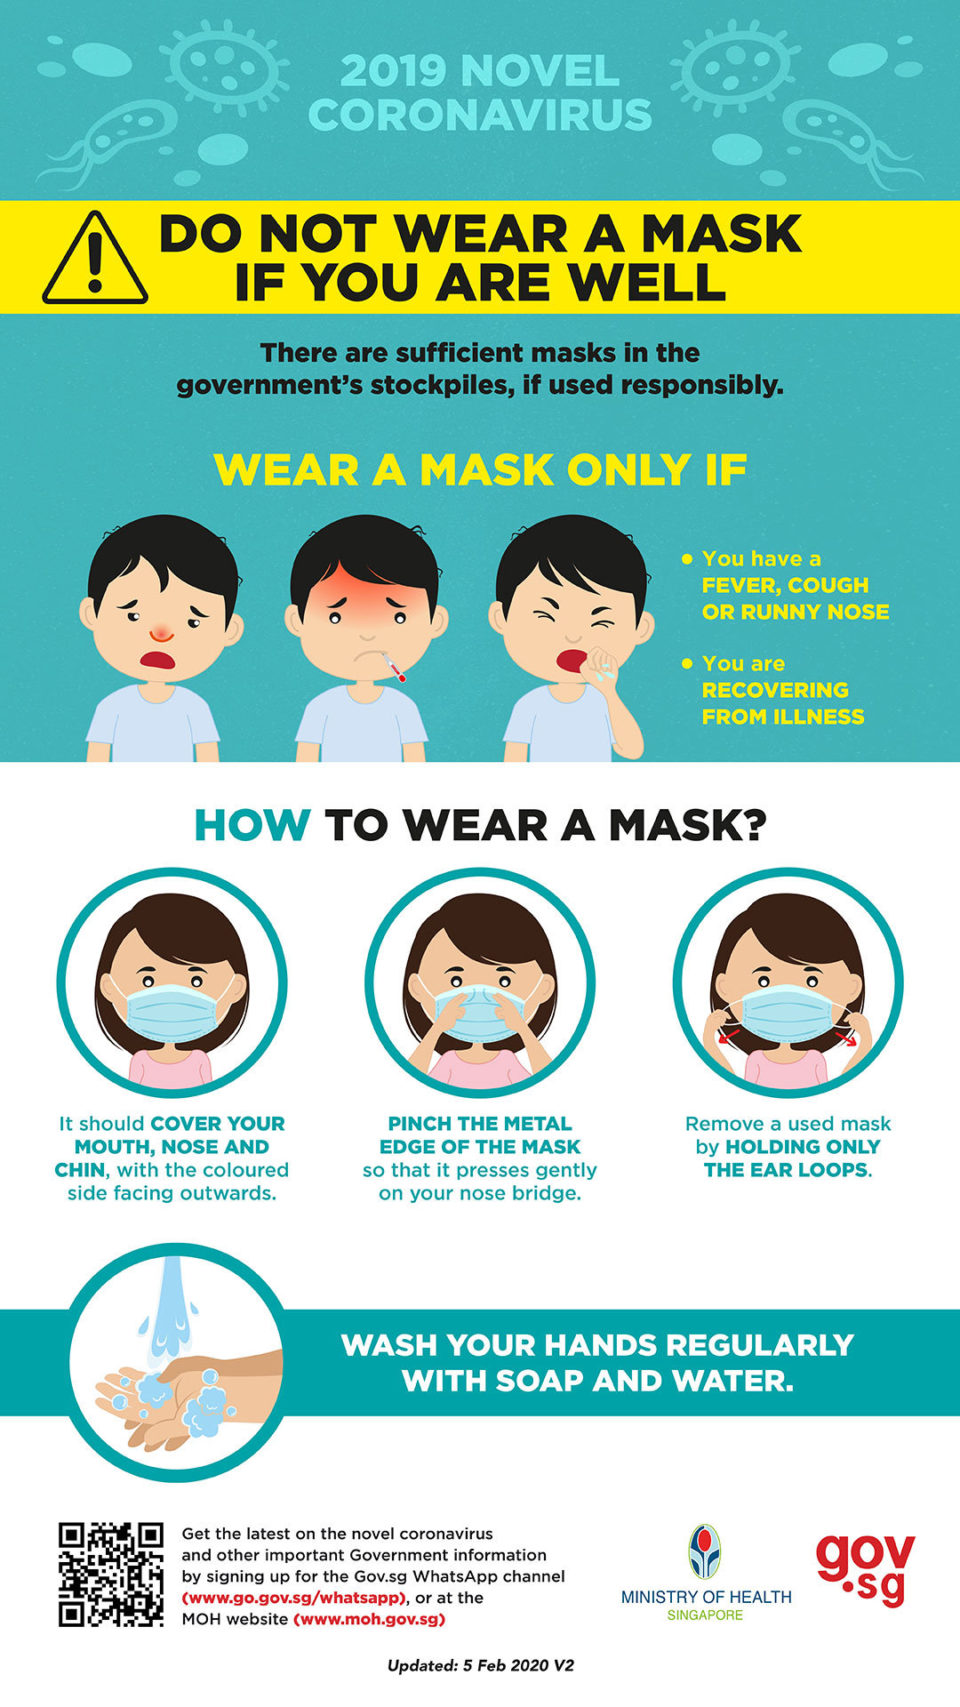 Do not wear masks if you are well.